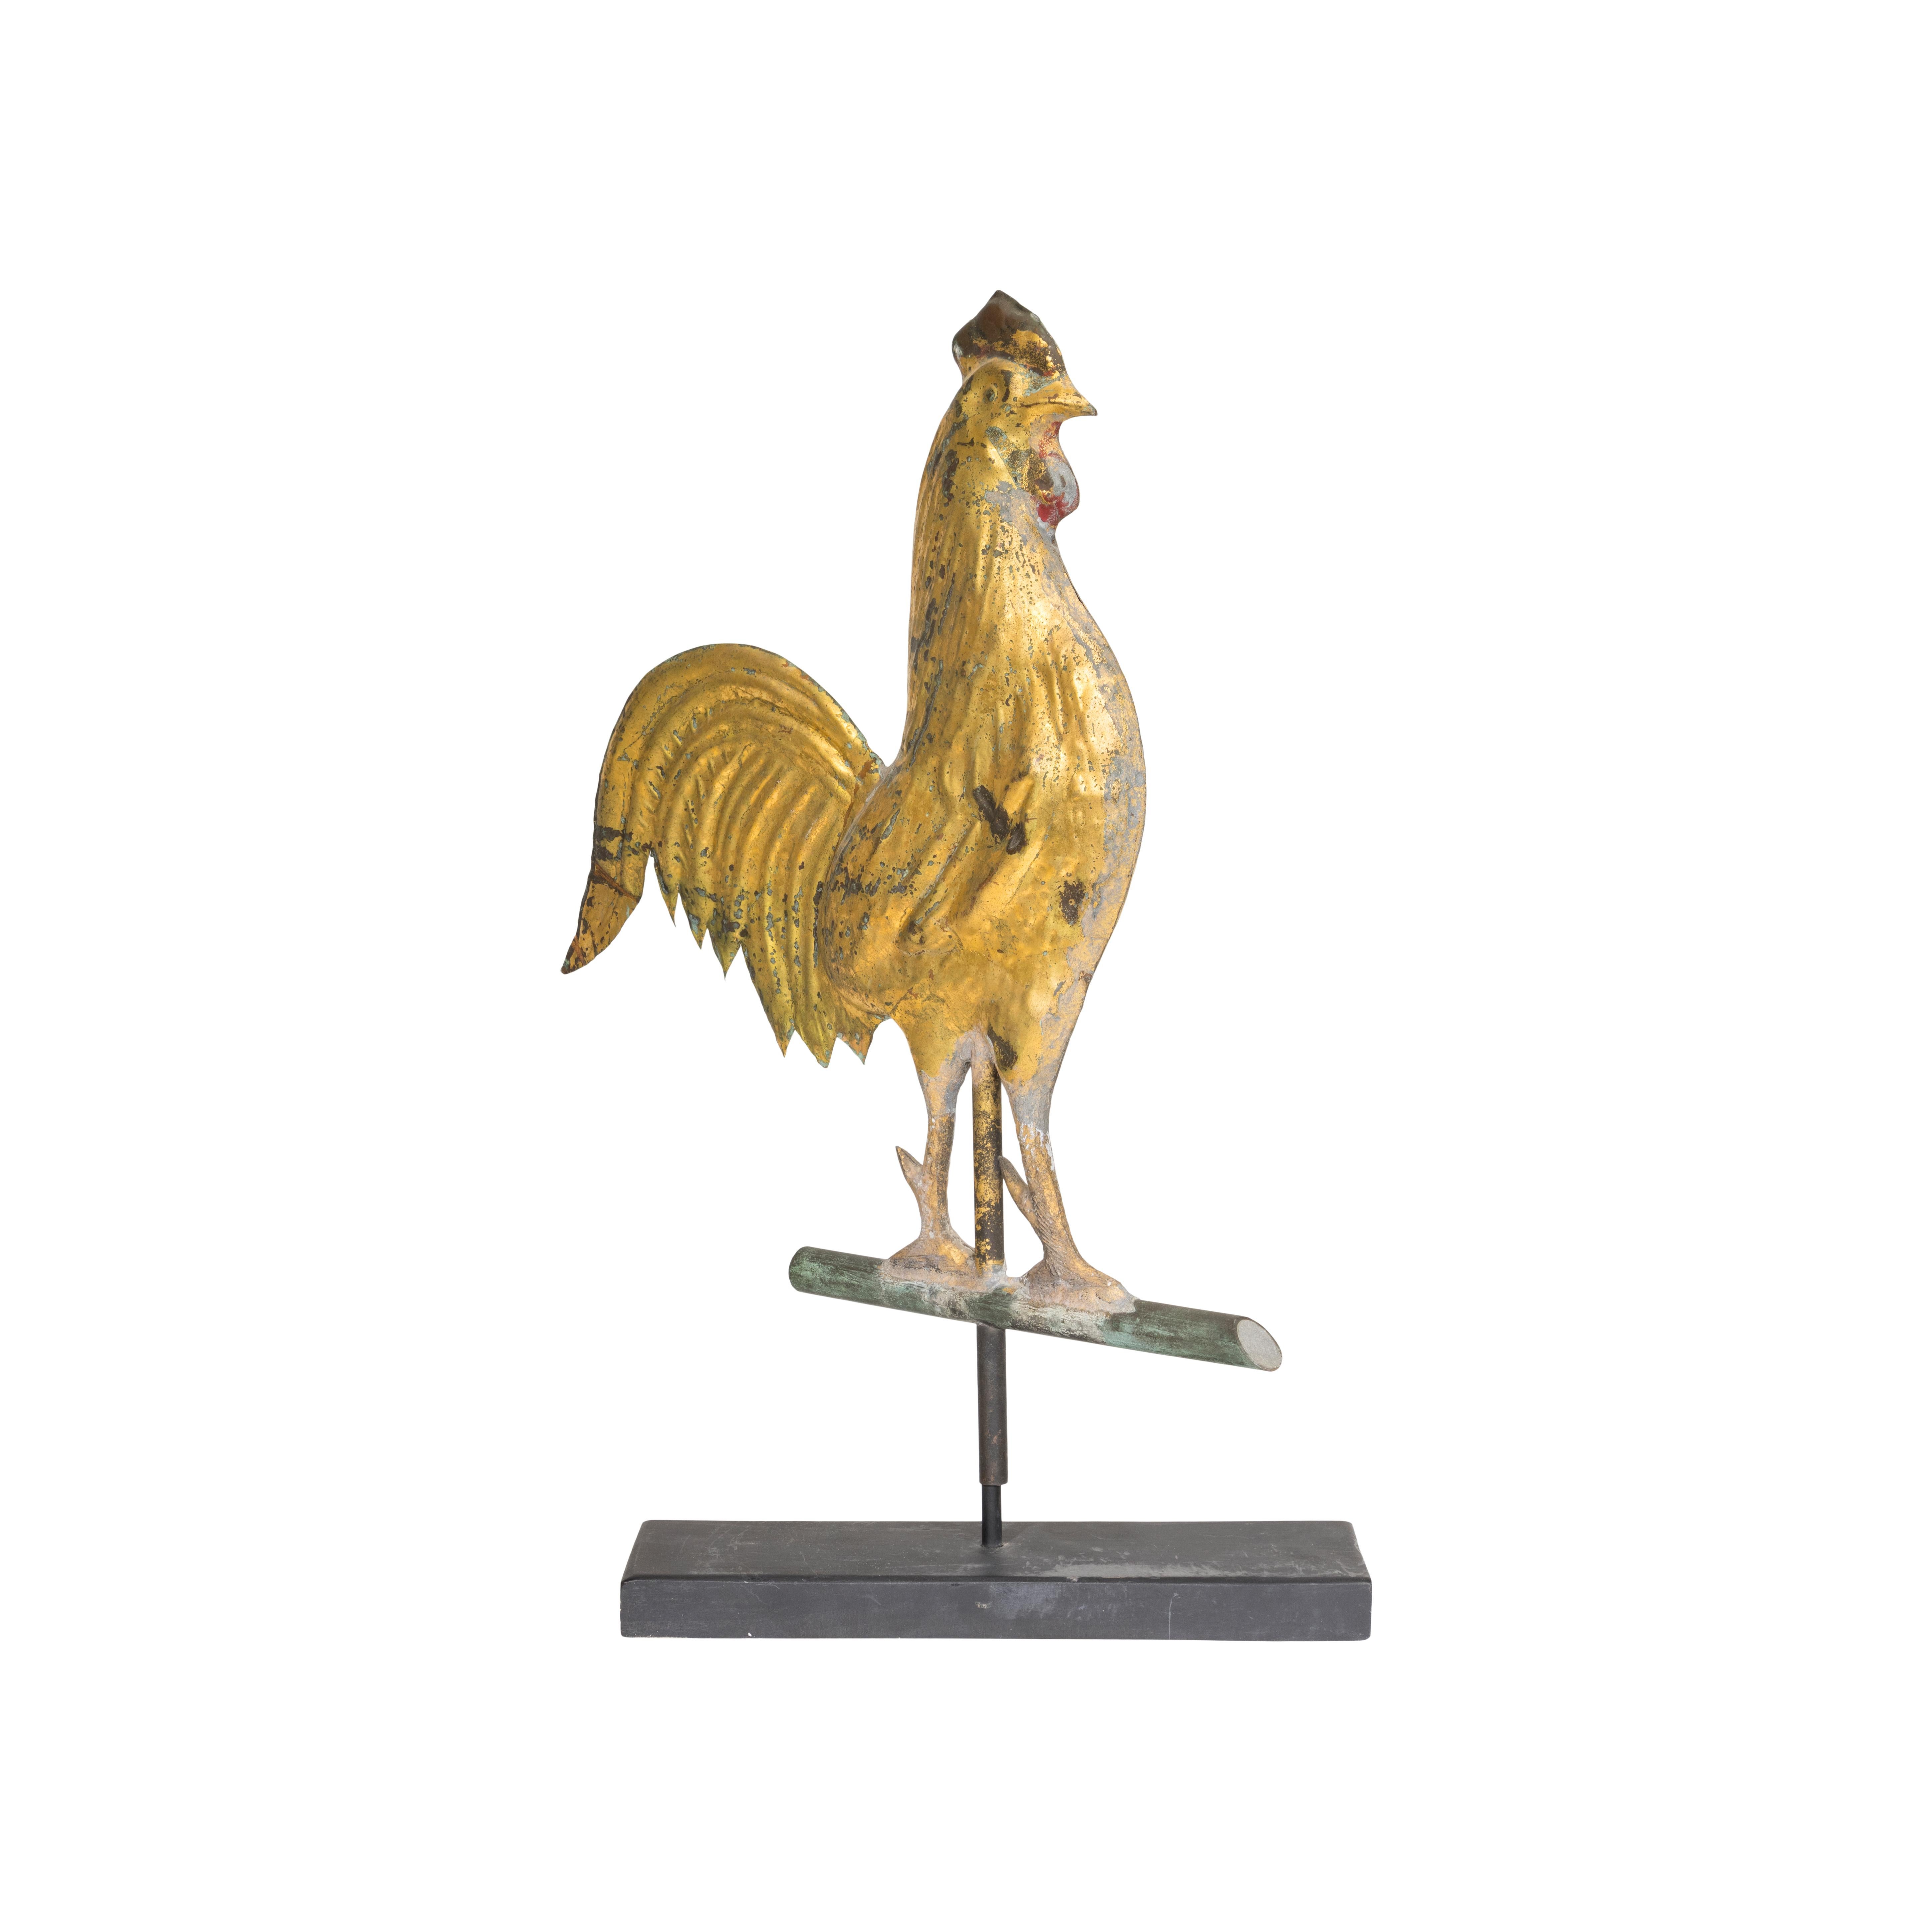 Early 20th Century 3 dimensional copper American rooster weather vane on more modern stand. Directional arrow clipped. Gold leaf finish. 16